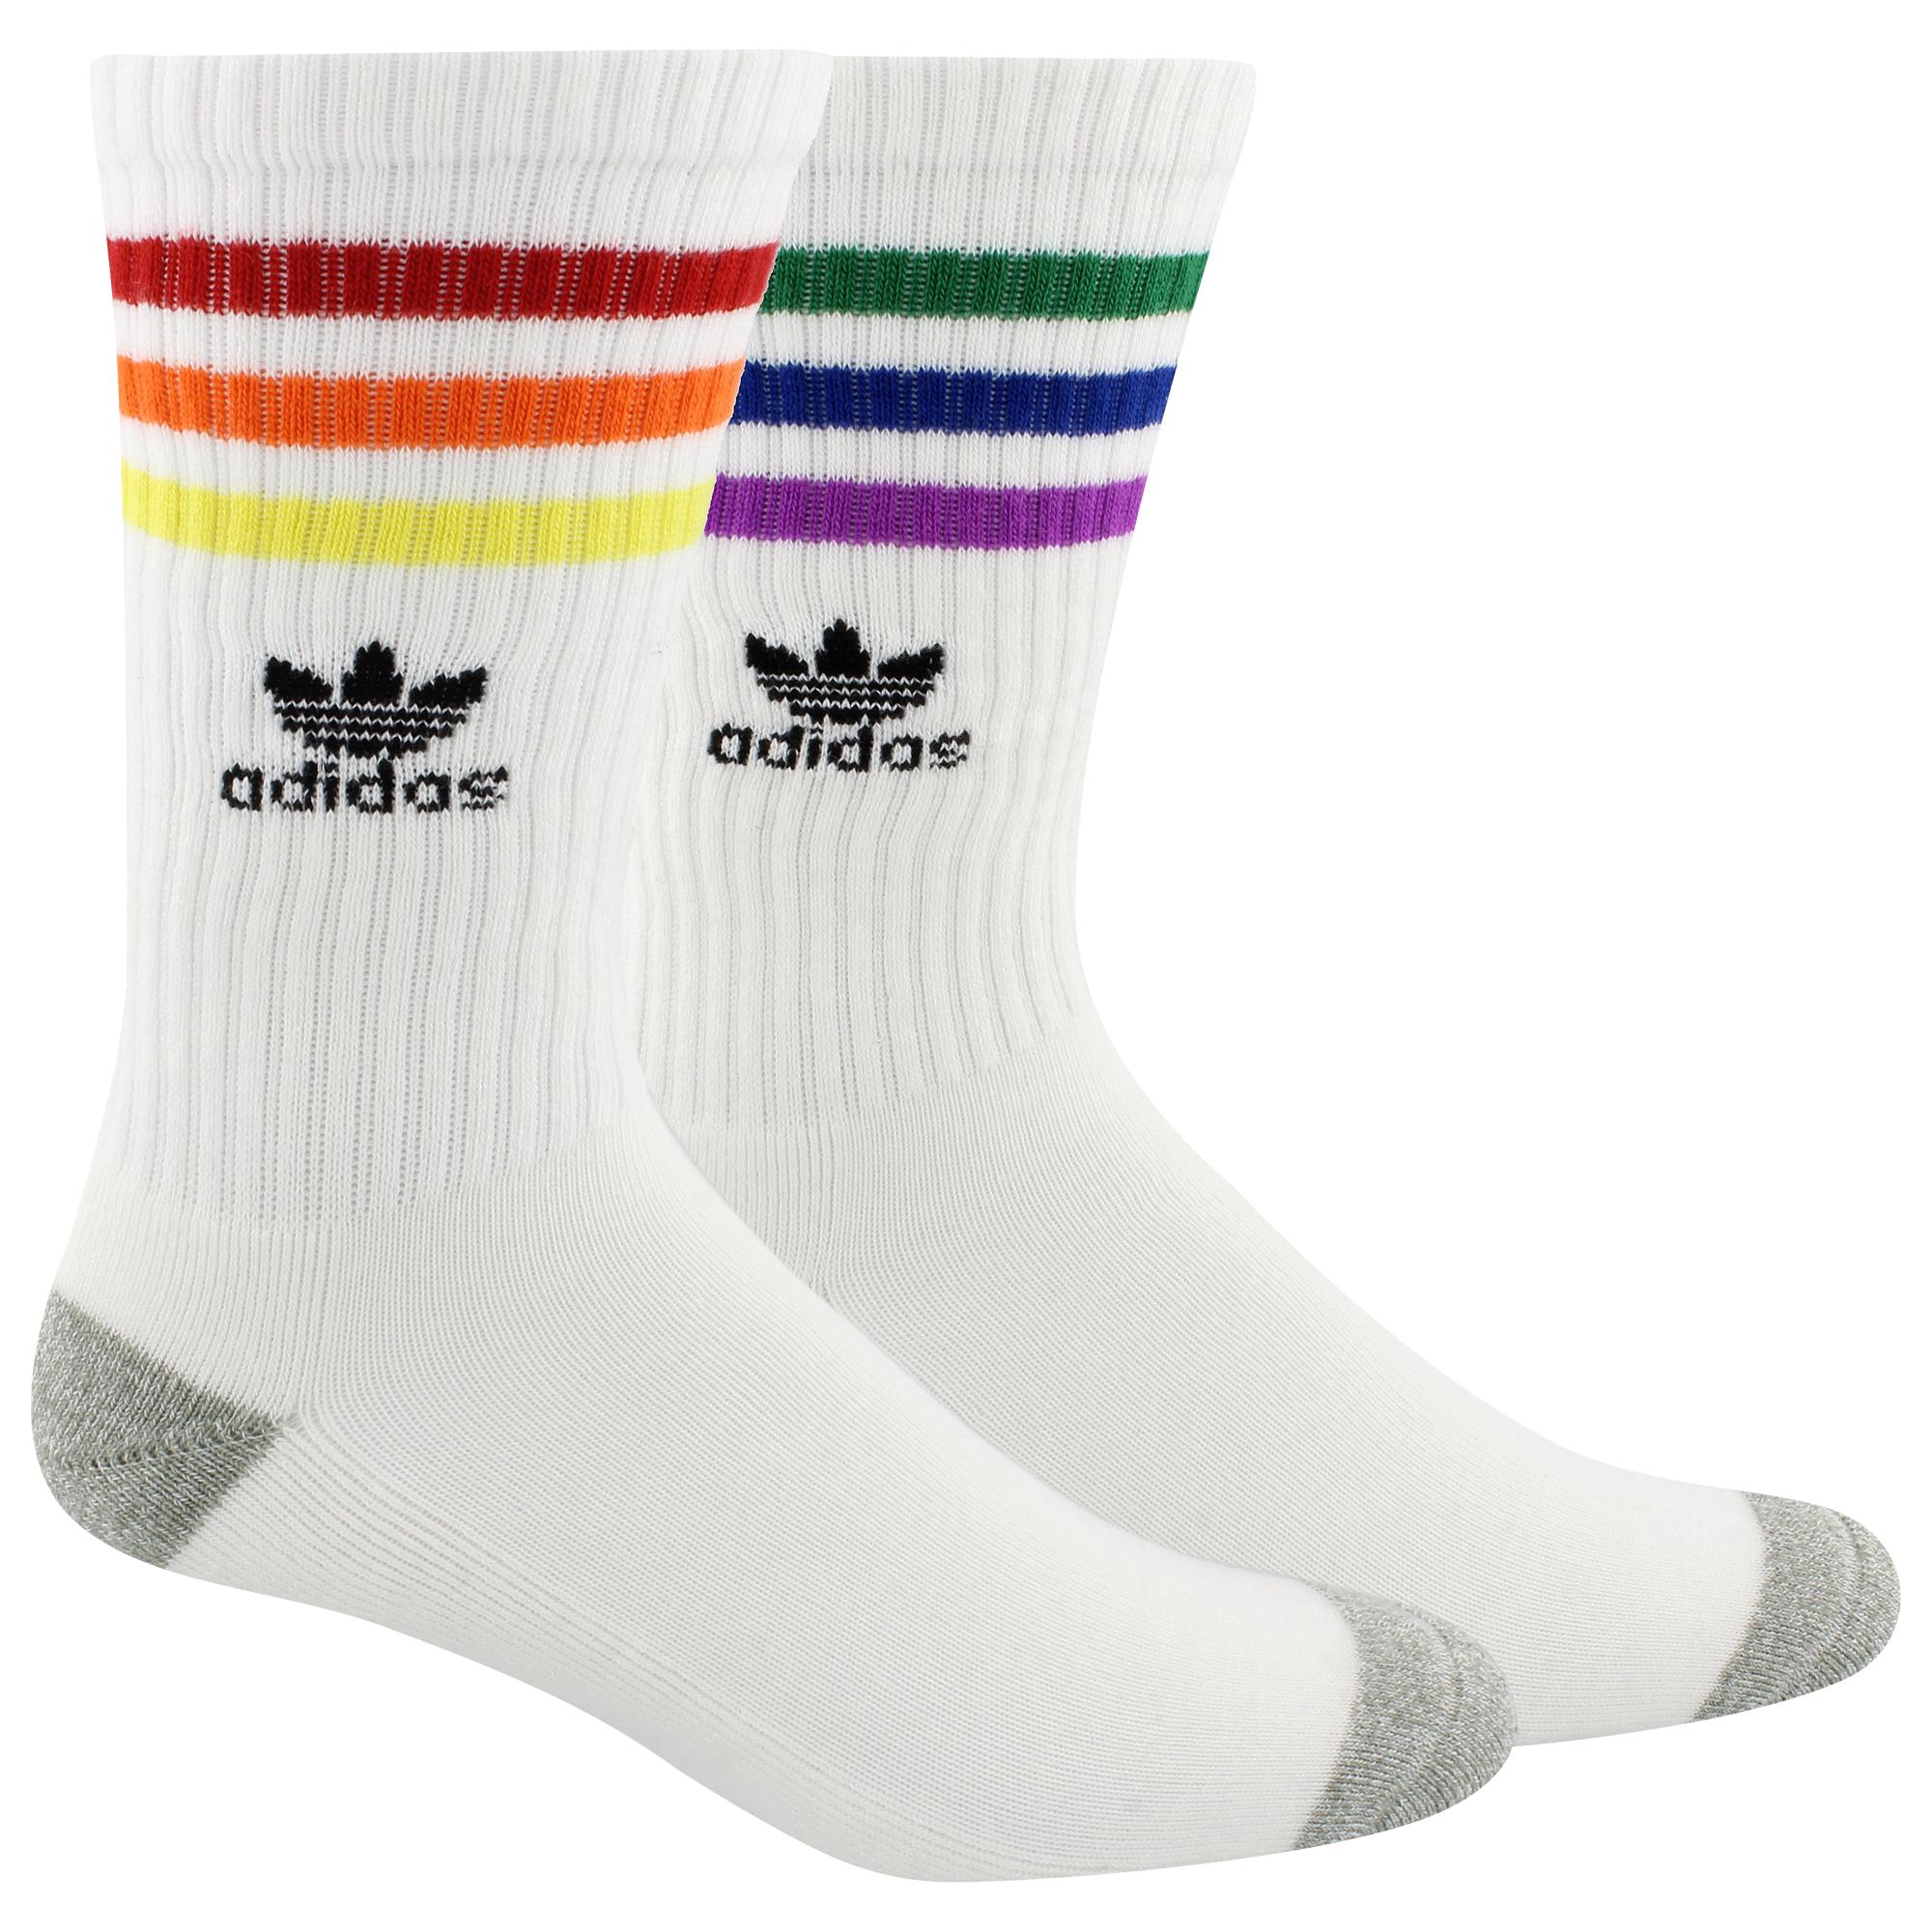 adidas Originals Synthetic Pride Roller Crew Socks in White/Rainbow (White)  for Men - Lyst